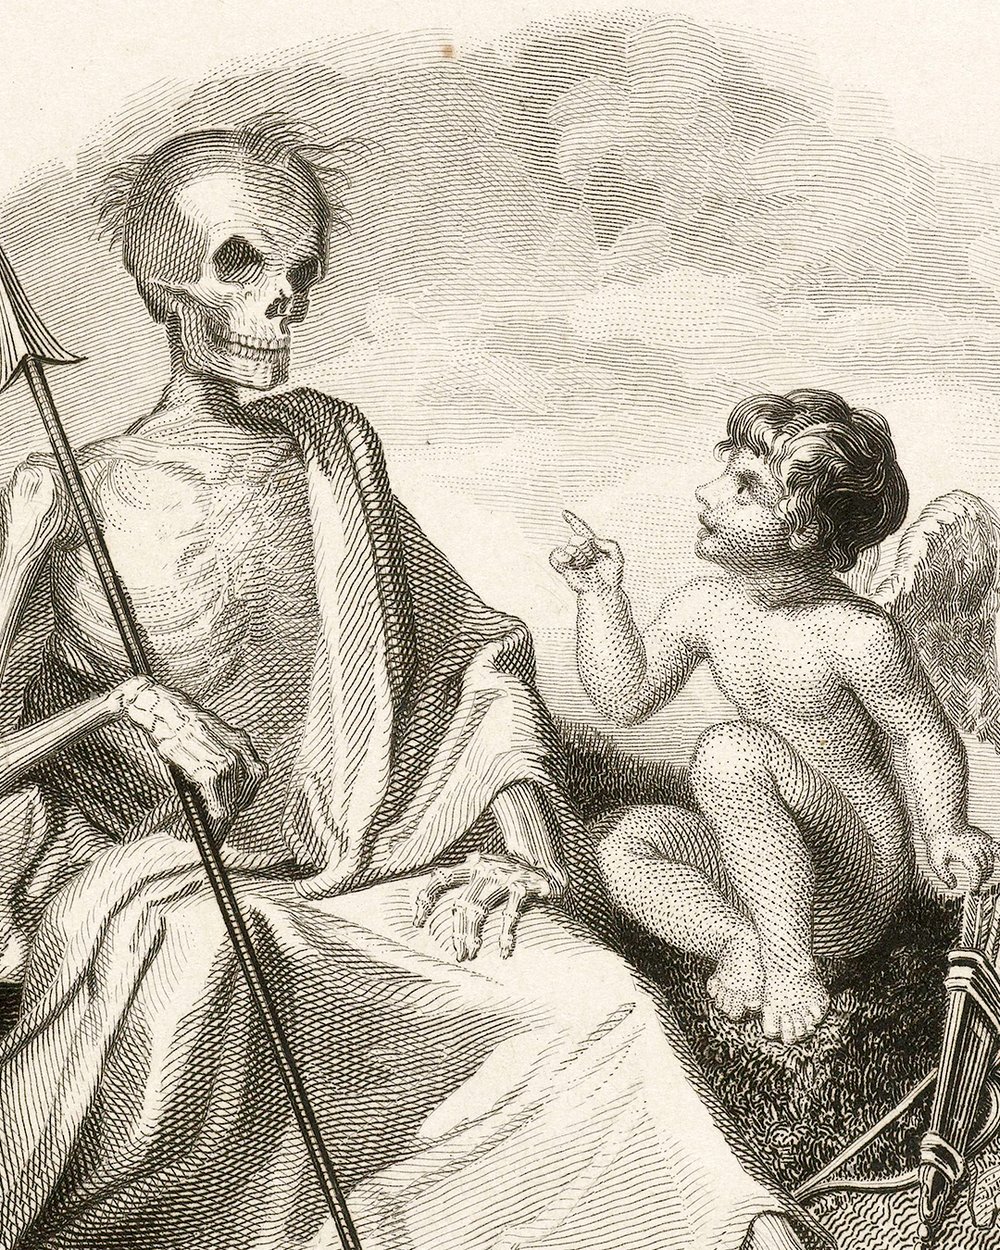 ''Love and Death, like a skeleton with a spear'' (1830 - 1845)